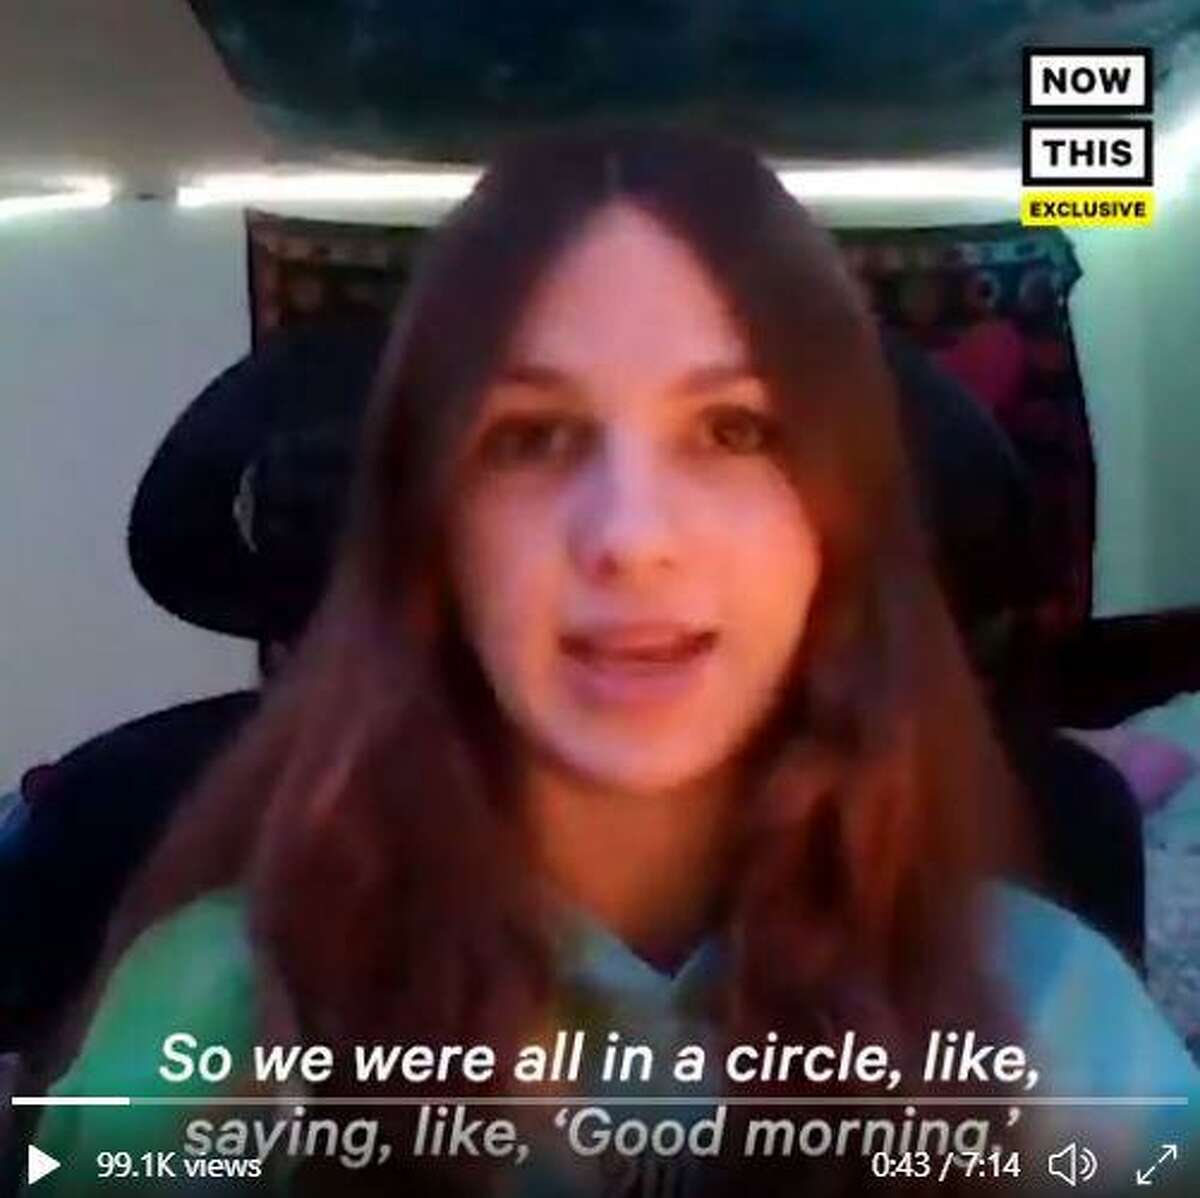 Ashley, a Newtown teenager, speaks about surviving the Sandy Hook massacre in 2012 during a video released Friday by the nonprofit Guns Down America to the news outlet NowThis.